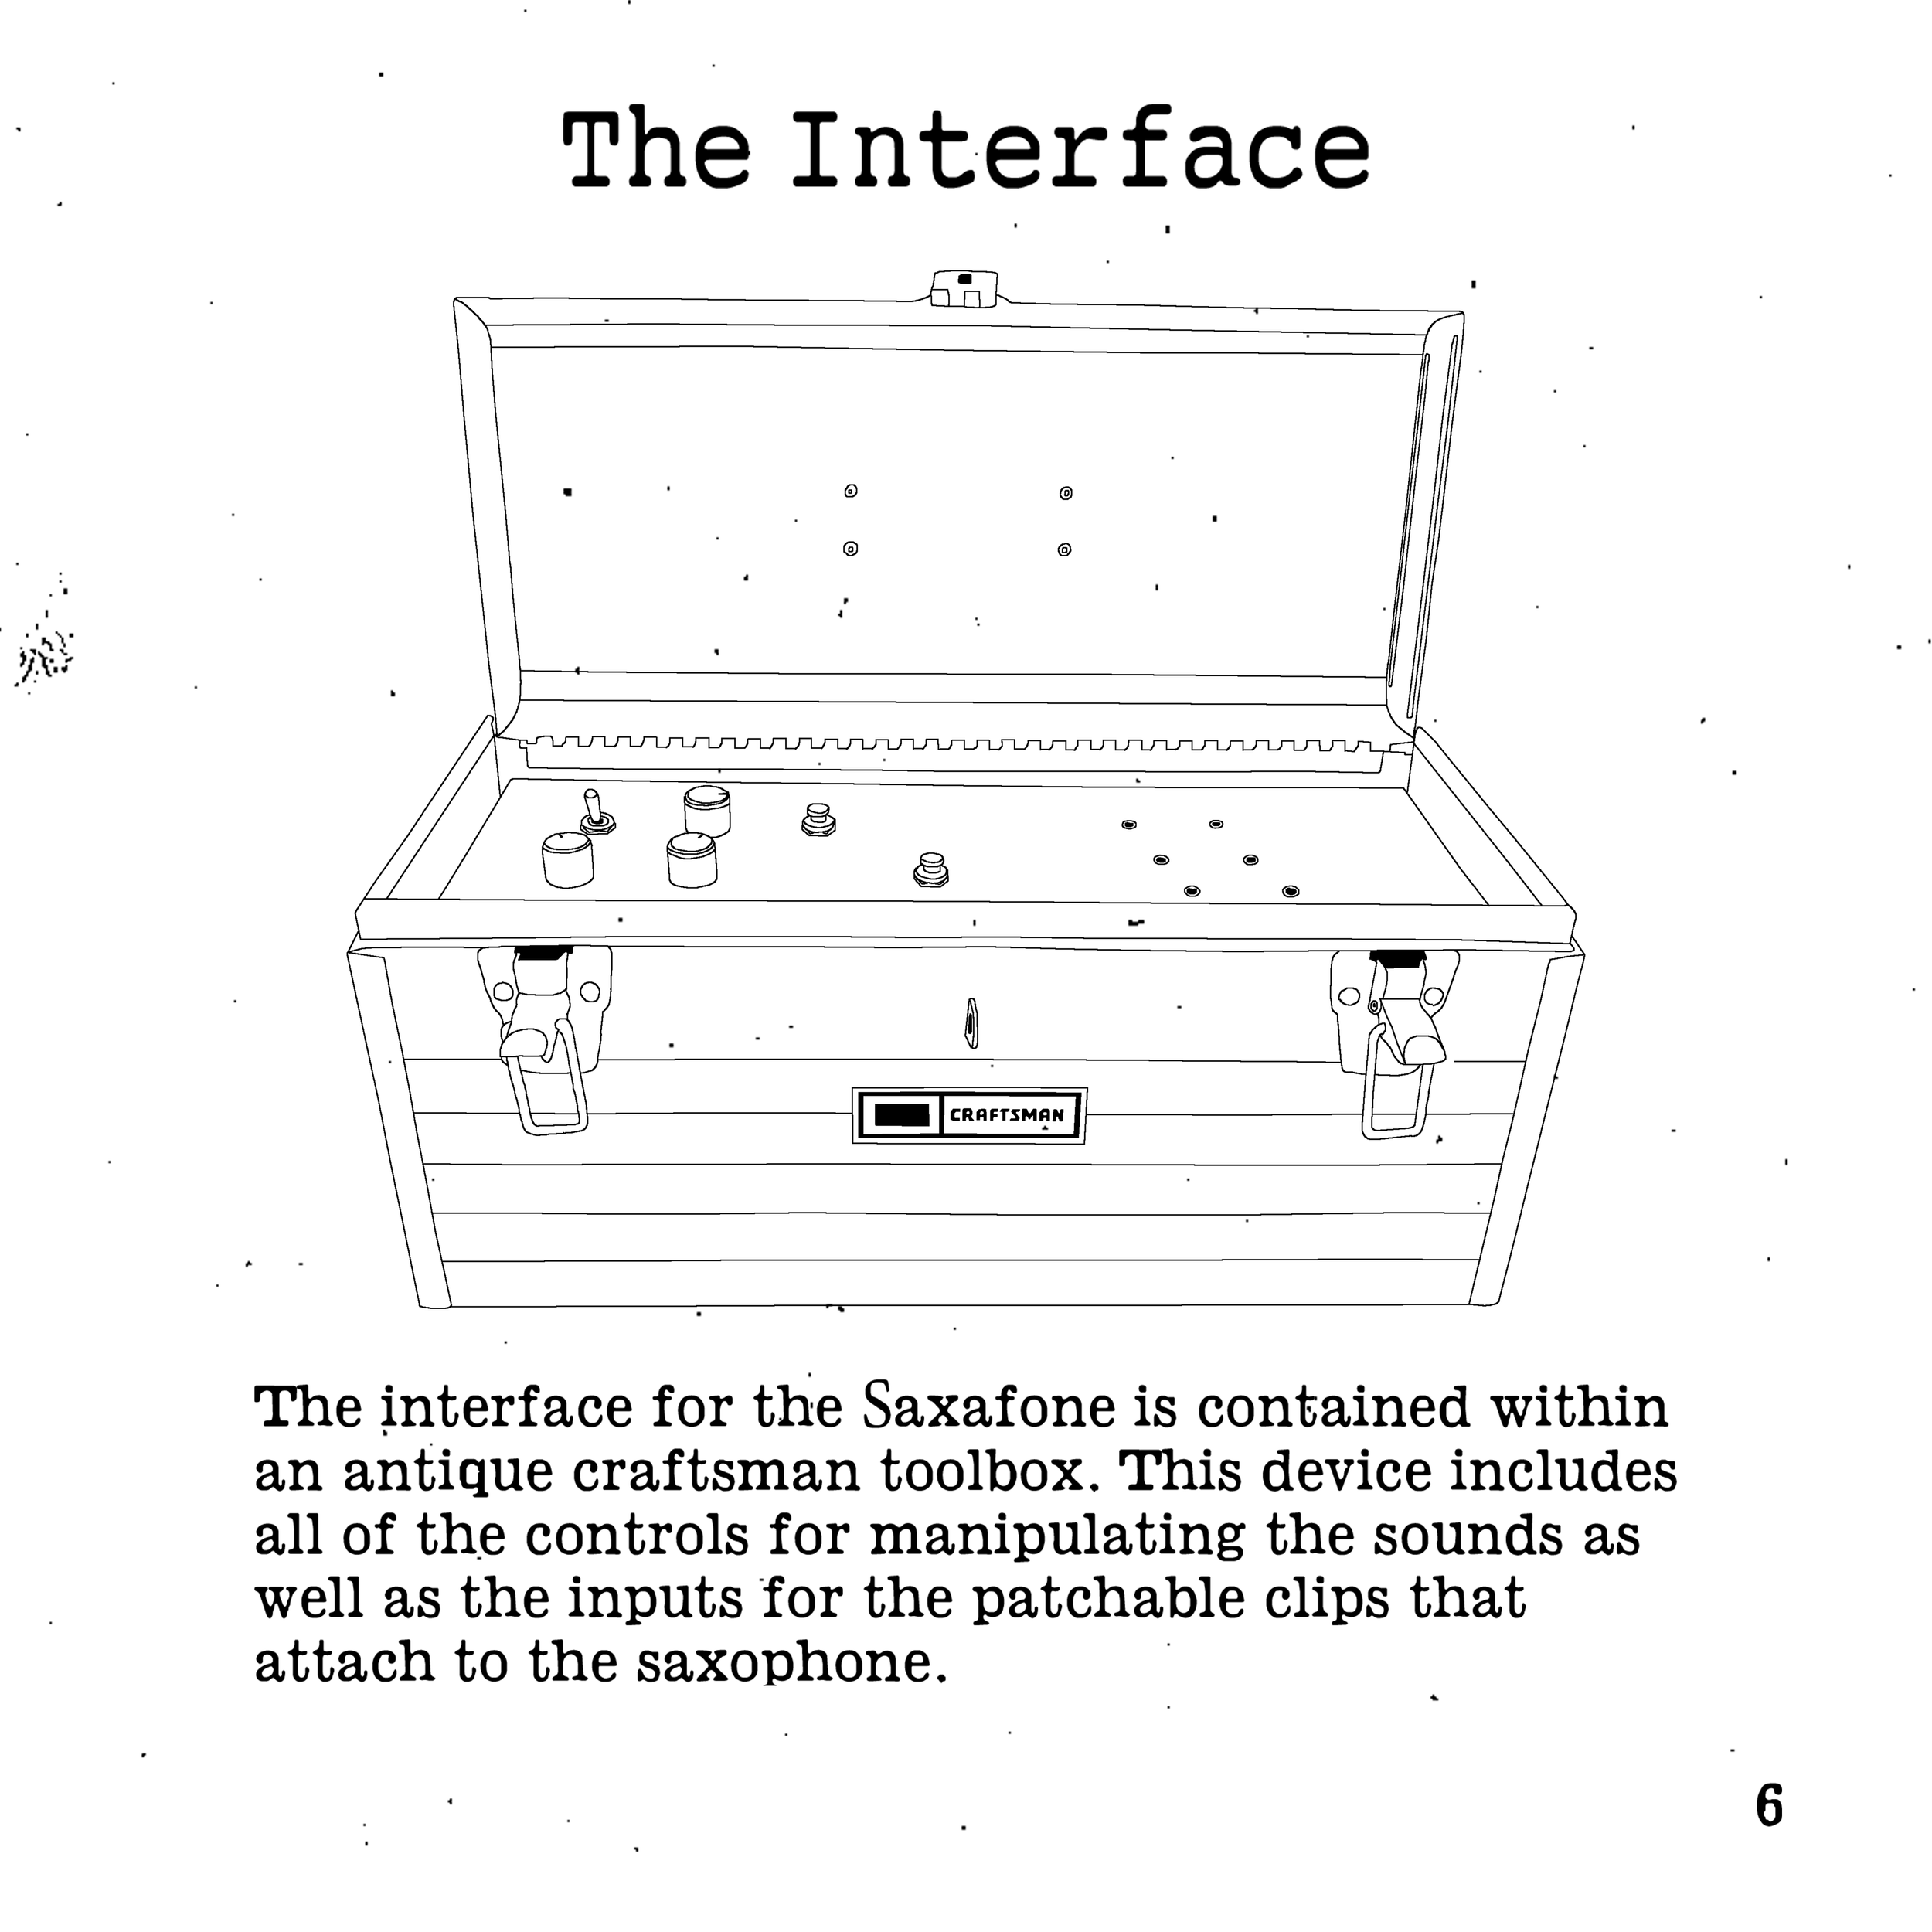 08_theInterface.png